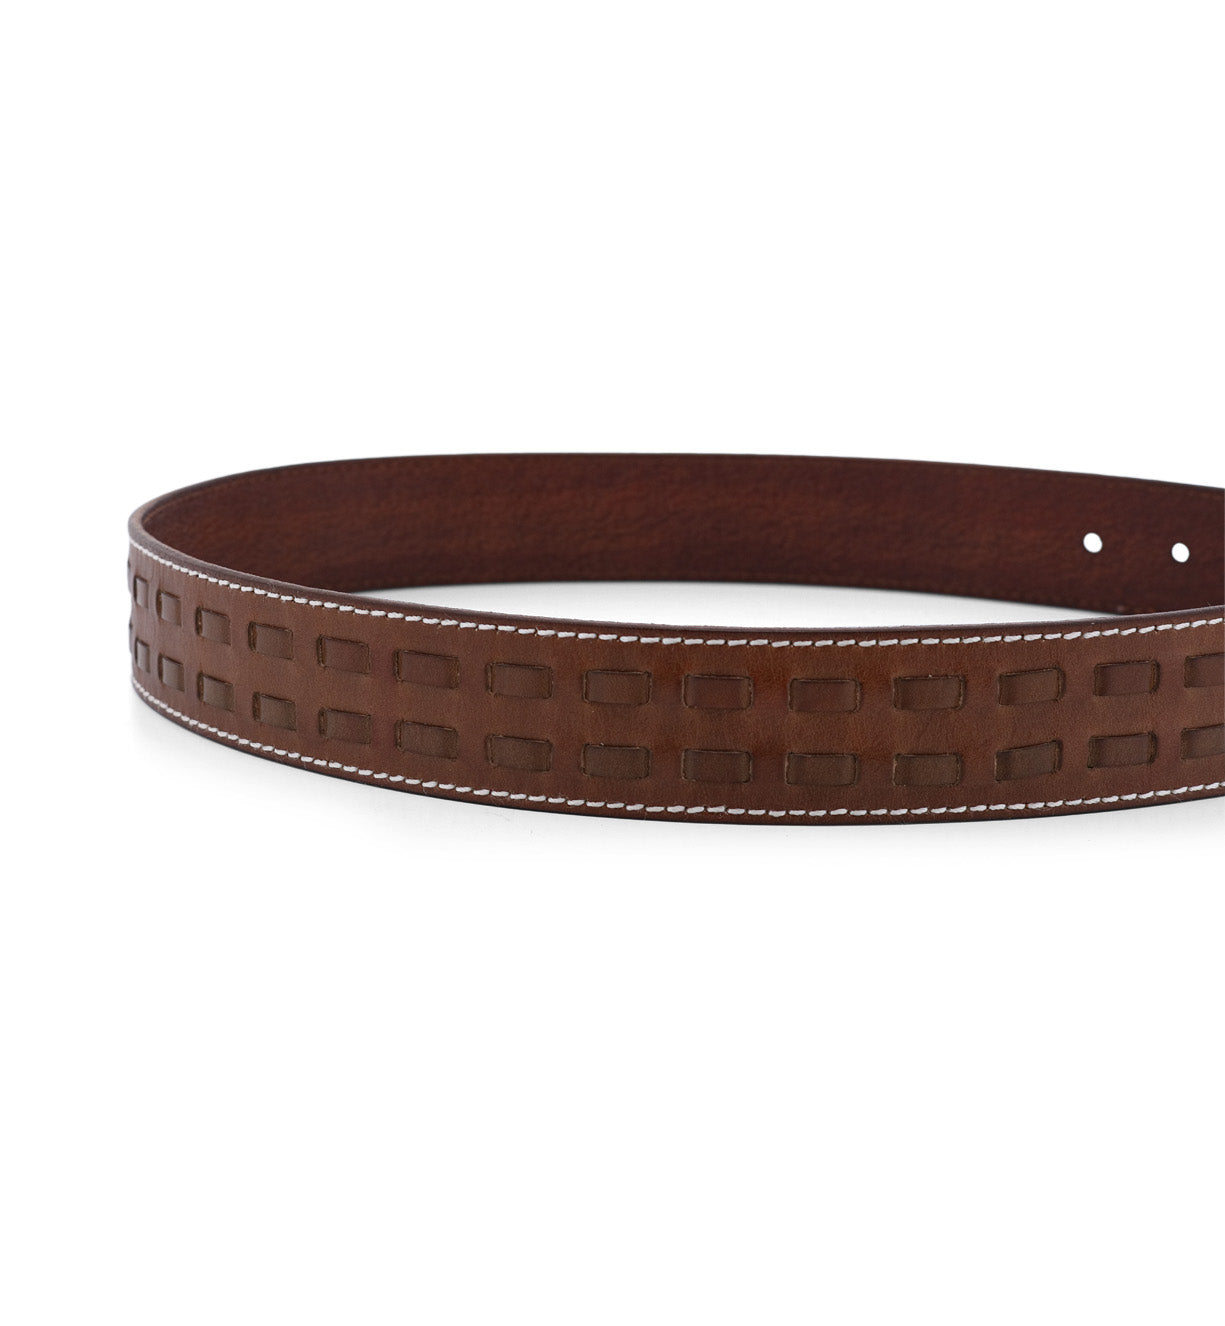 A Ross by Bed Stu brown leather belt on a white background.